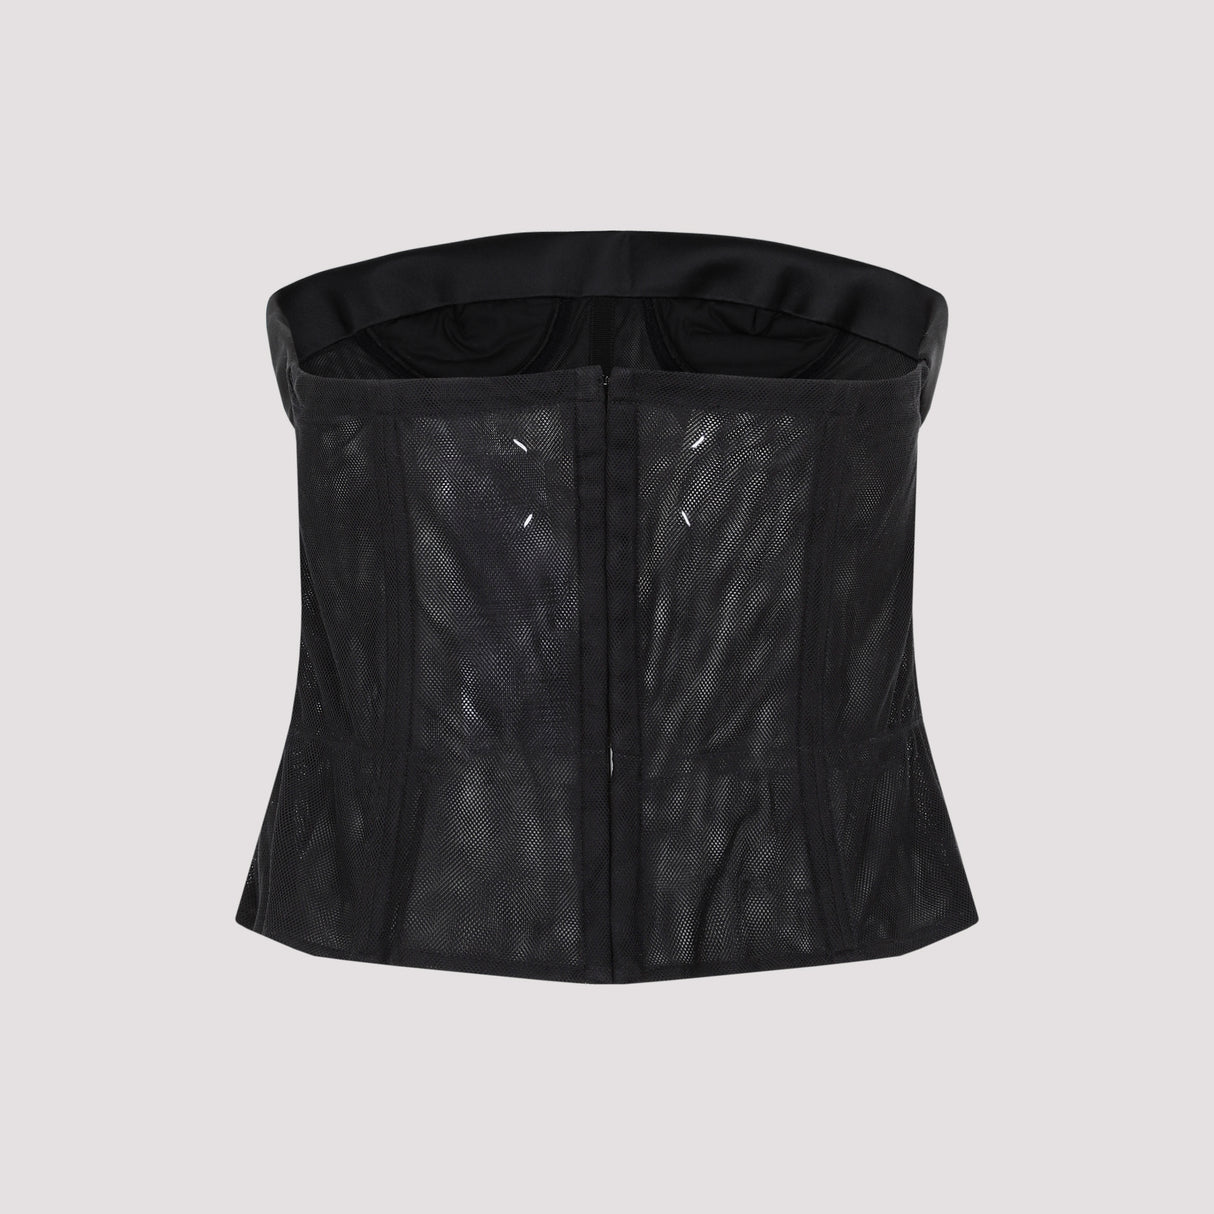 MAISON MARGIELA Fitted Mesh Bustier Top for Women - Elegant and Edgy